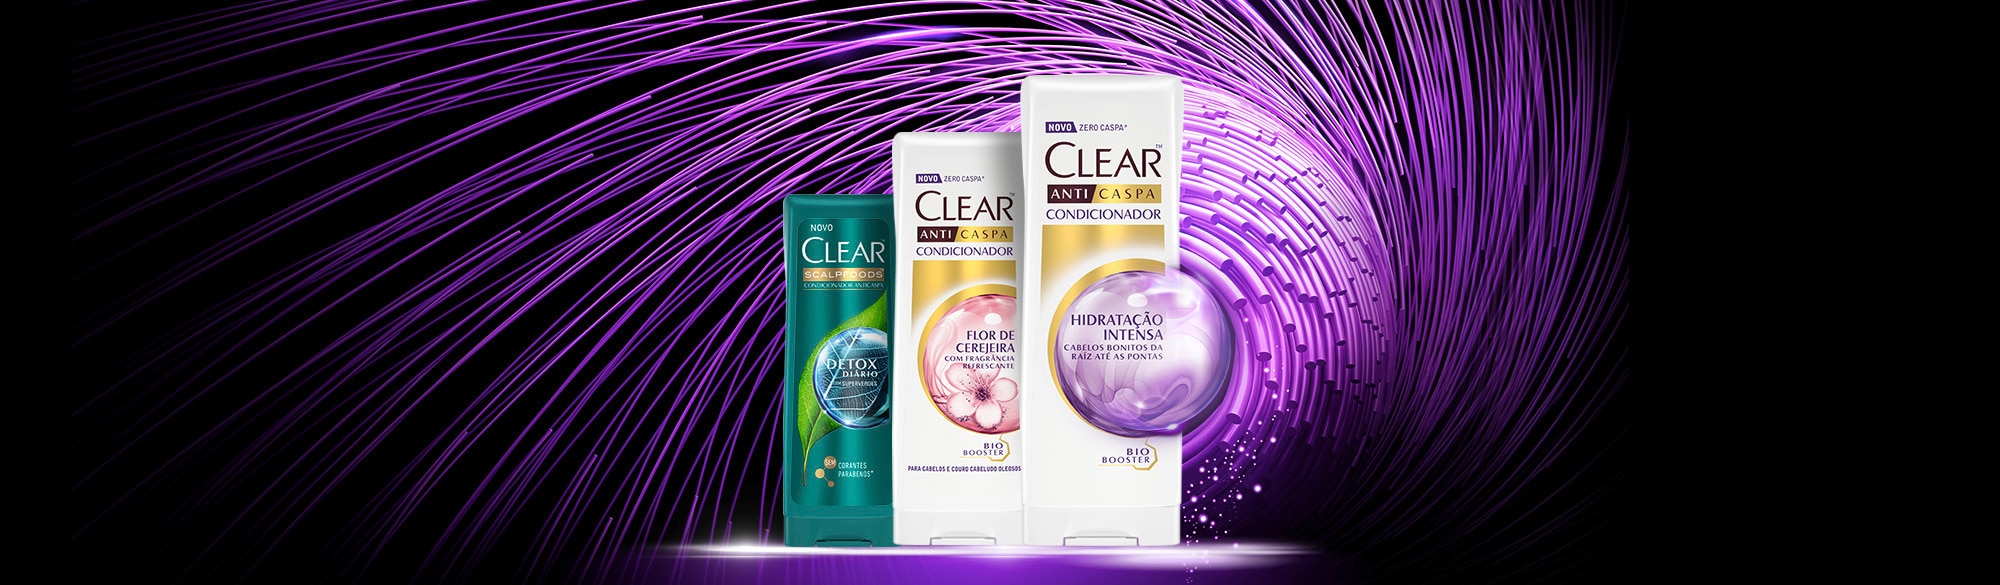 CLEAR Conditioner